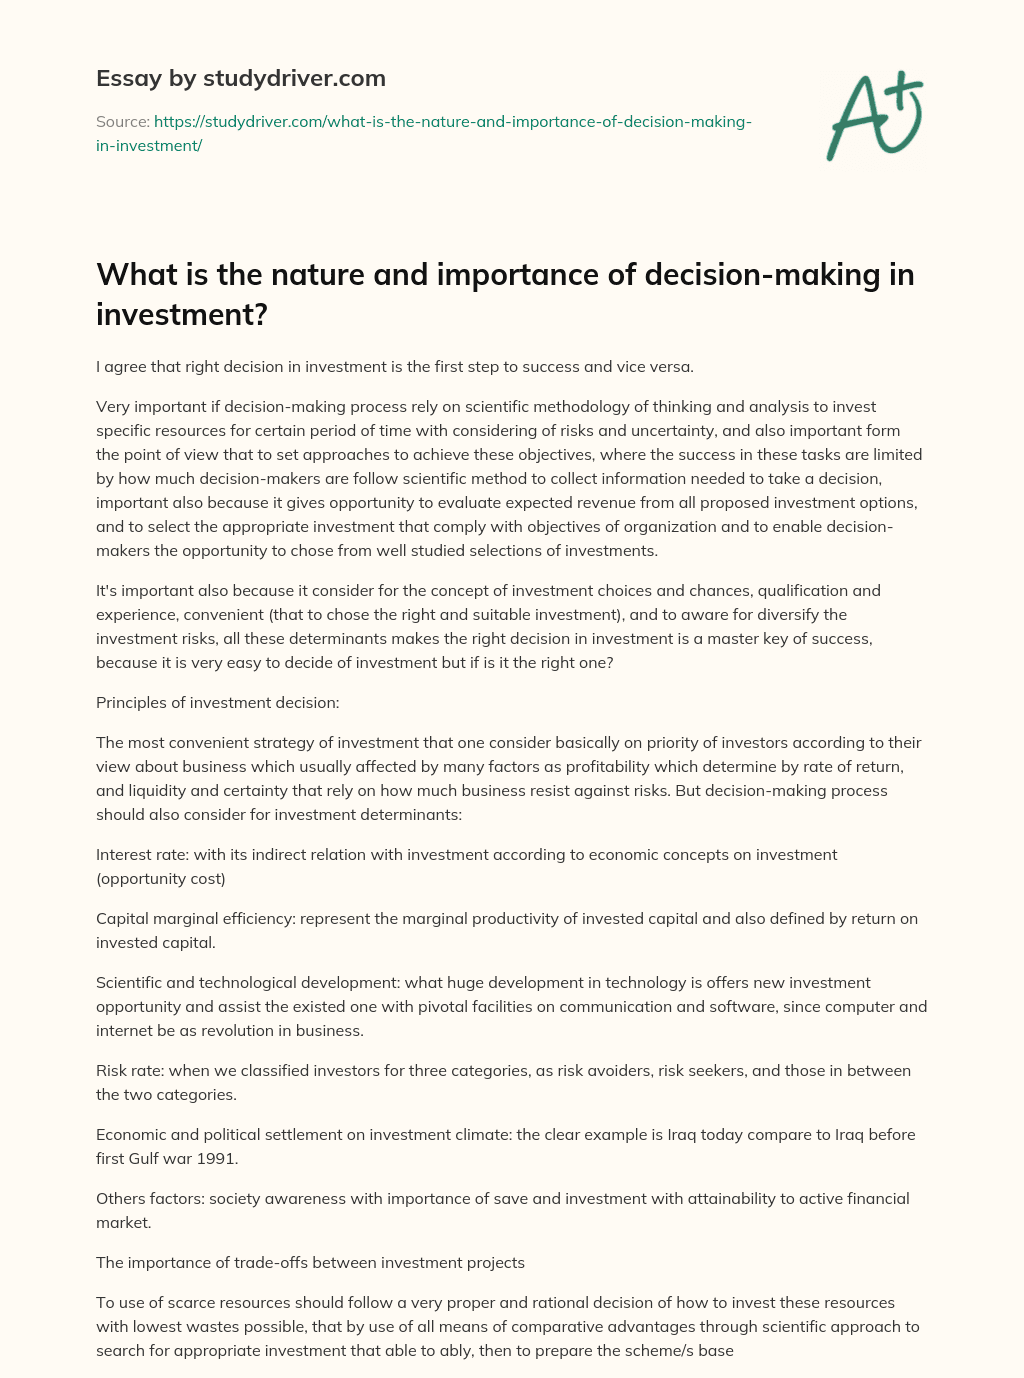 What is the Nature and Importance of Decision-making in Investment? essay